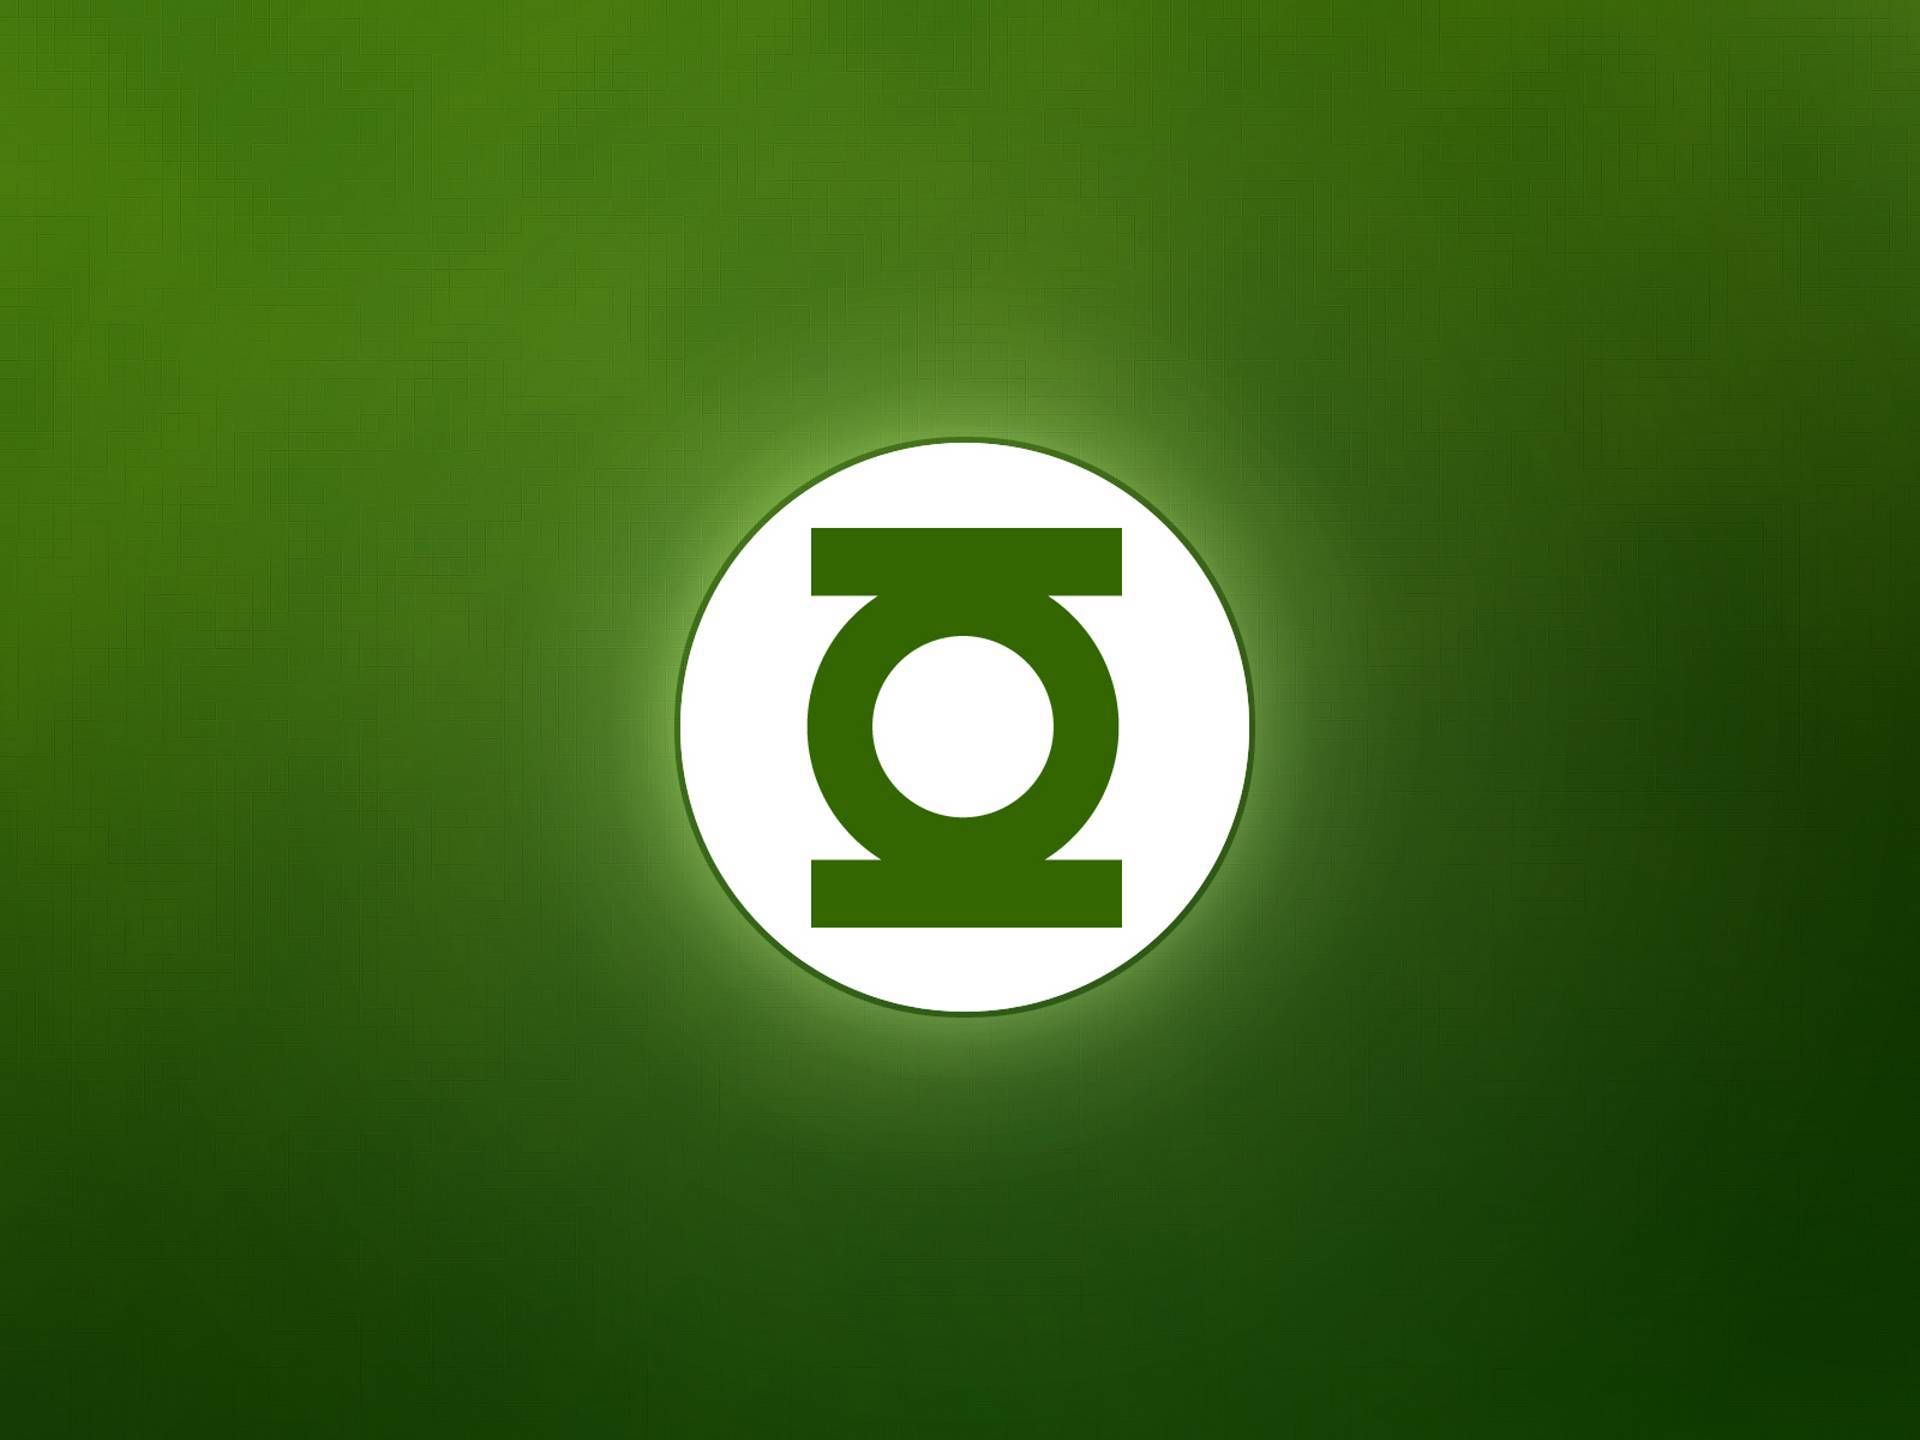 Green lantern logos wallpaper - High Quality and other